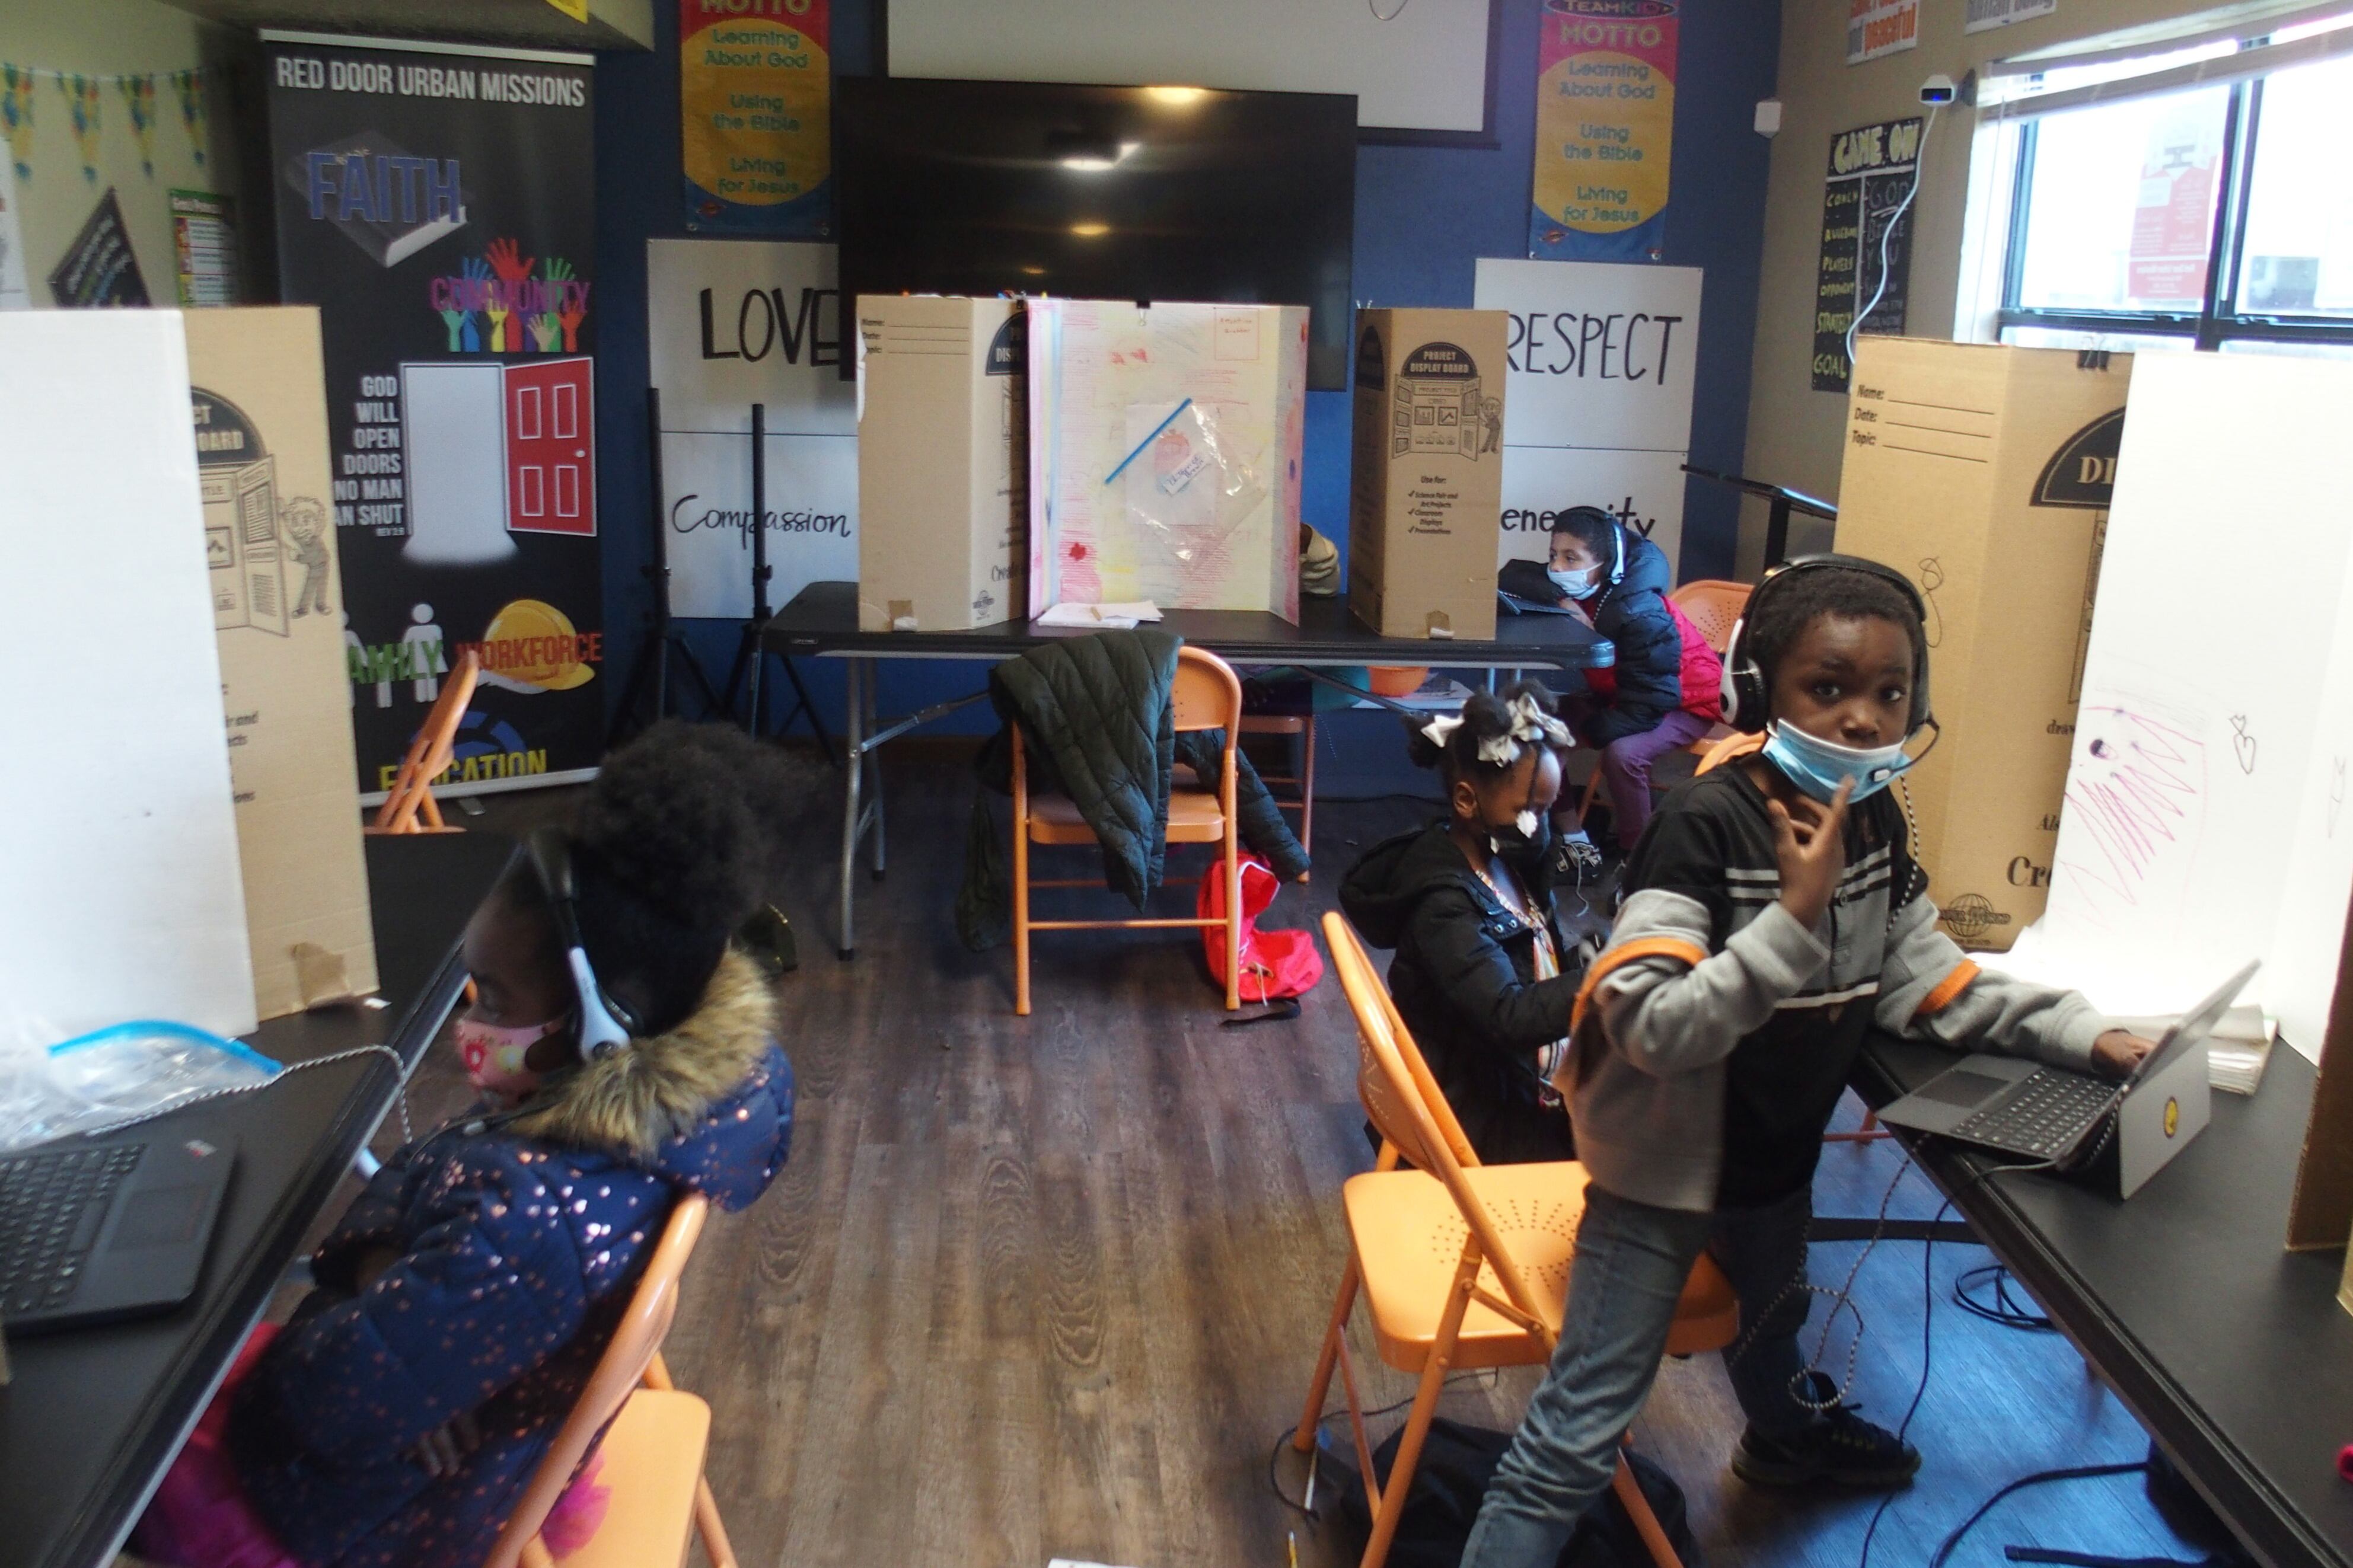 Four children wearing masks and headphones work at laptop computers in a narrow classroom with orange folding chairs. Three hand-lettered posters on the walls read “Respect,” “Love,” and “Compassion.” 